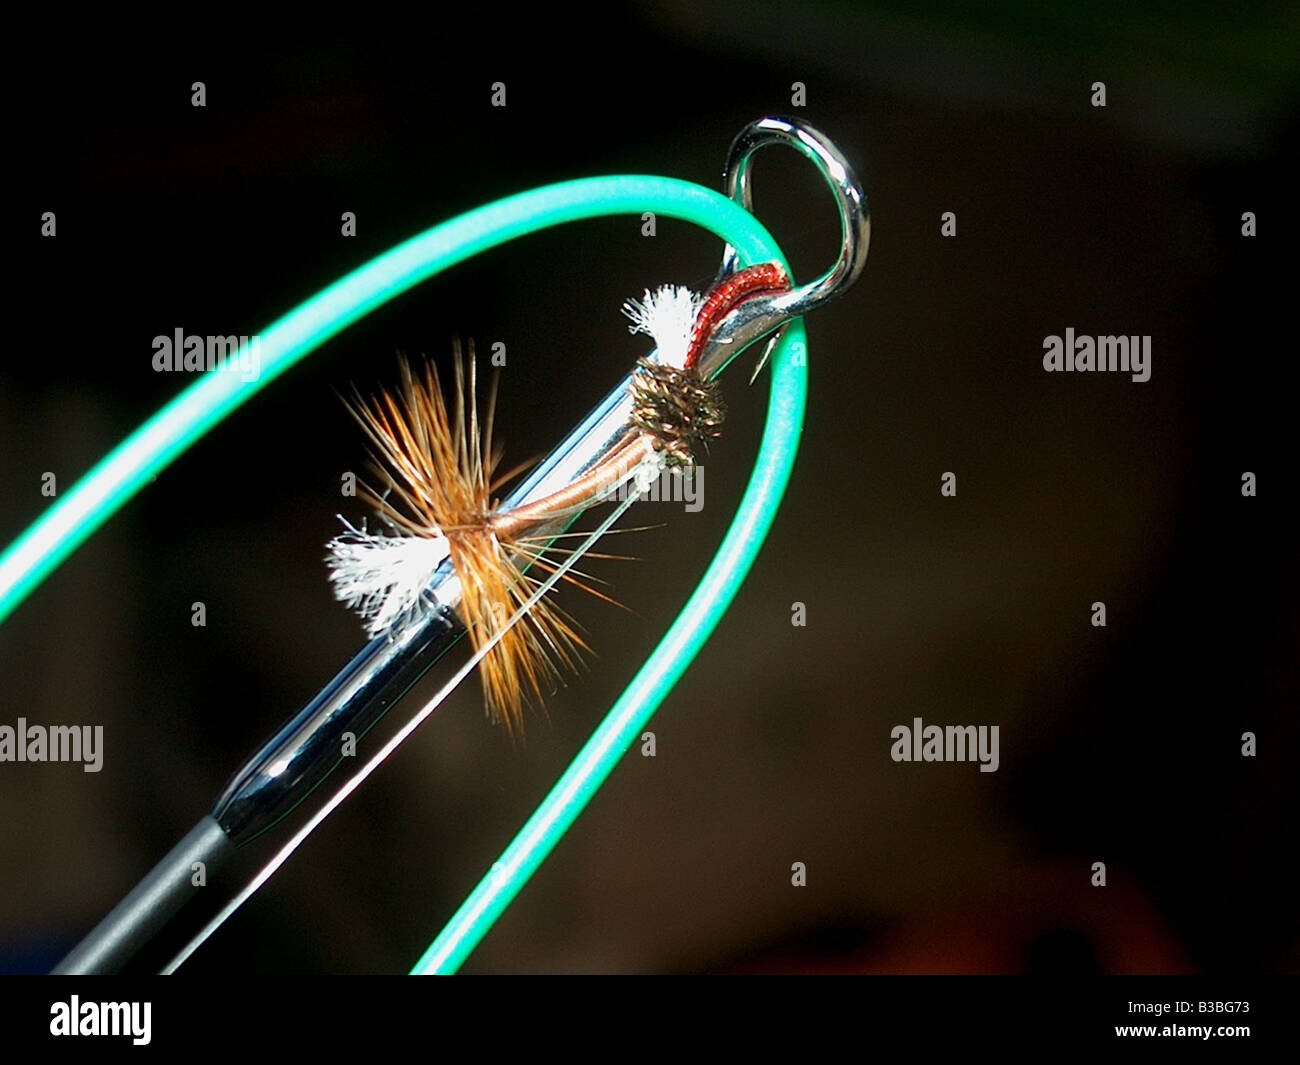 Fly fishing hook safely under tension Stock Photo